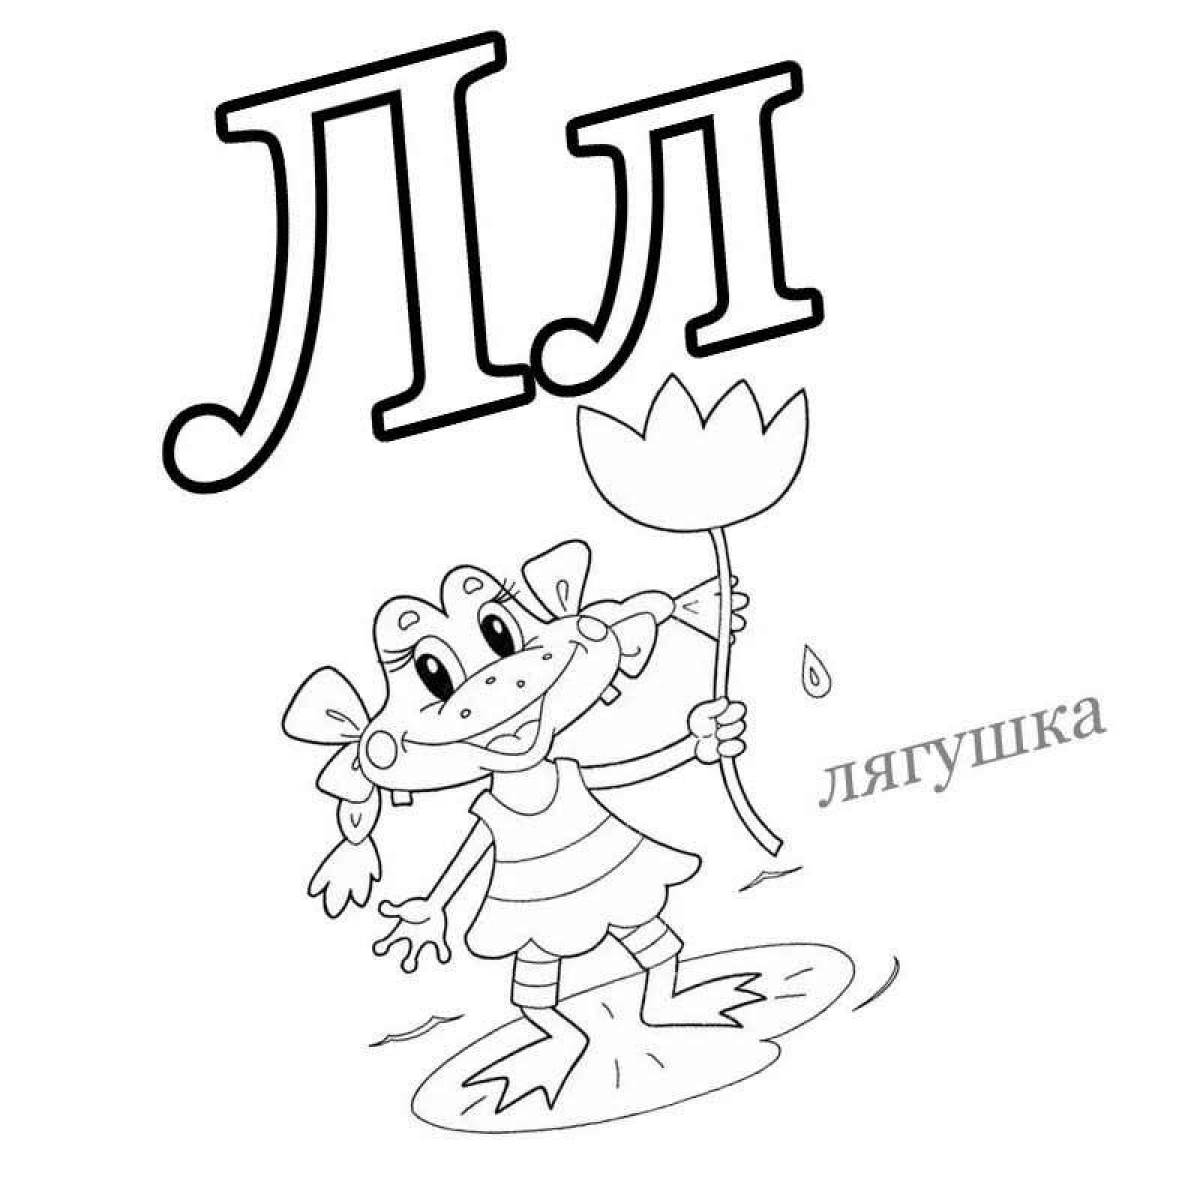 Lore coloring page with amazing Russian alphabet